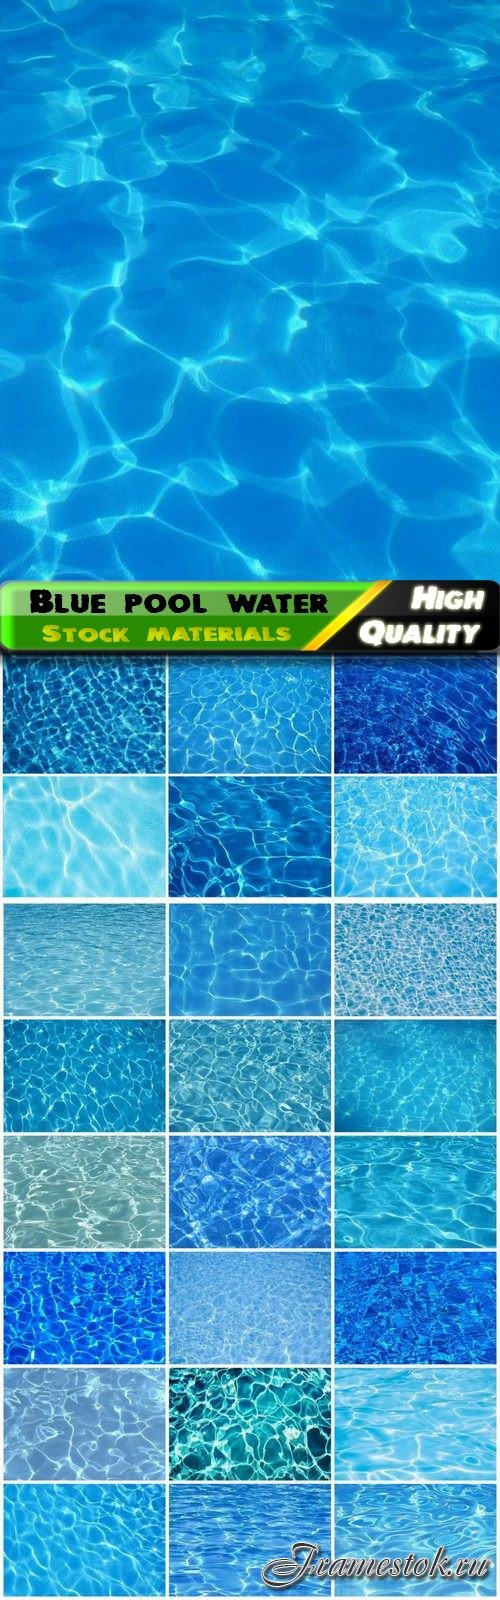 Texture of blue clean pool water with waves - 25 HQ Jpg